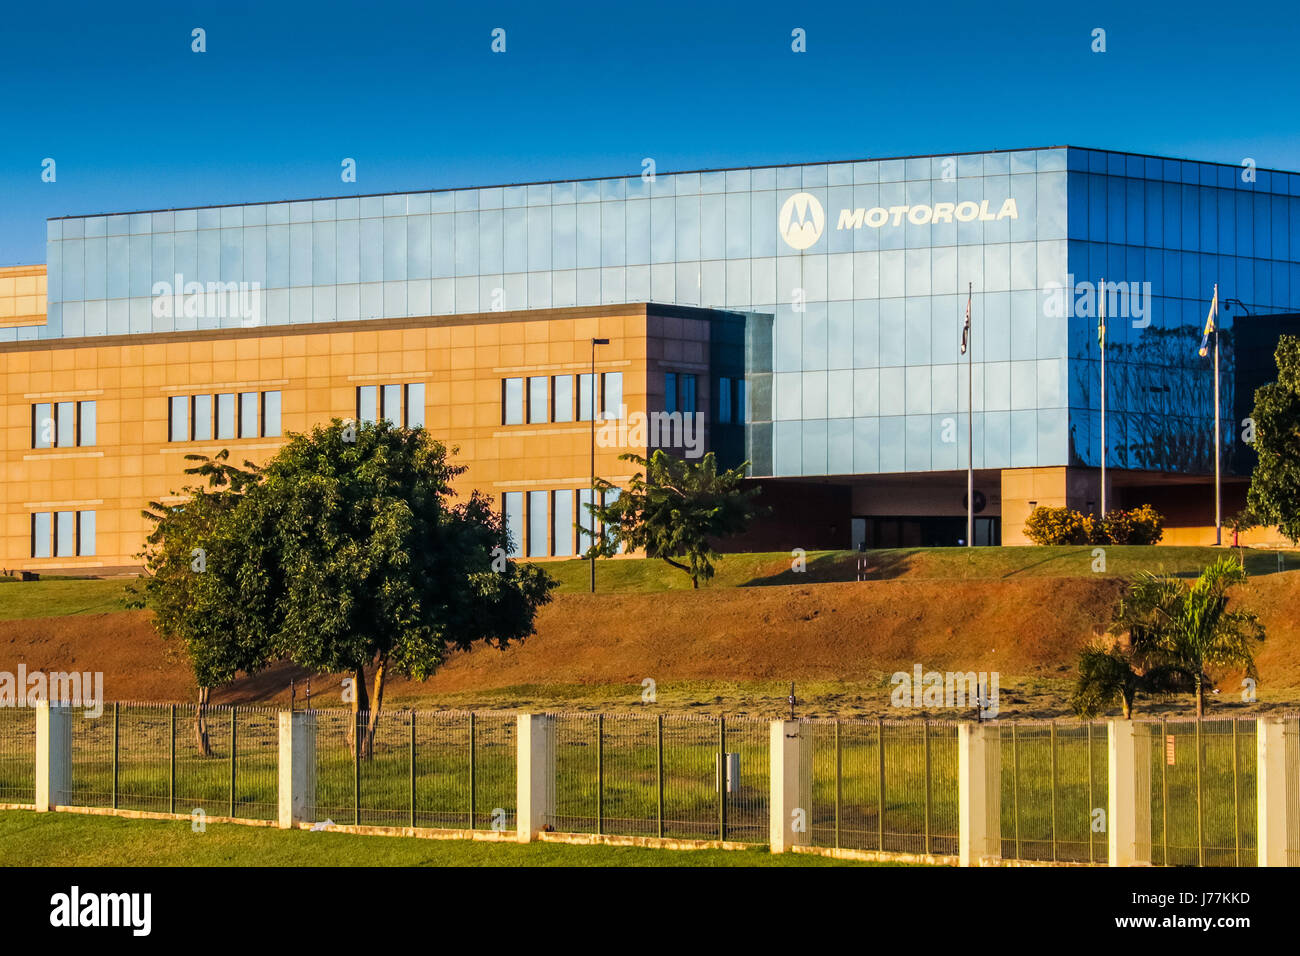 JAGUARIÚNA, SP - 23.05.2017: FABRICA DA MOTOROLA - Facade of the Motorola  Mobility Brasil factory, located in Jaguariúna, interior of SP. Motorola,  recently acquired by Lenovo, is one of the largest handset